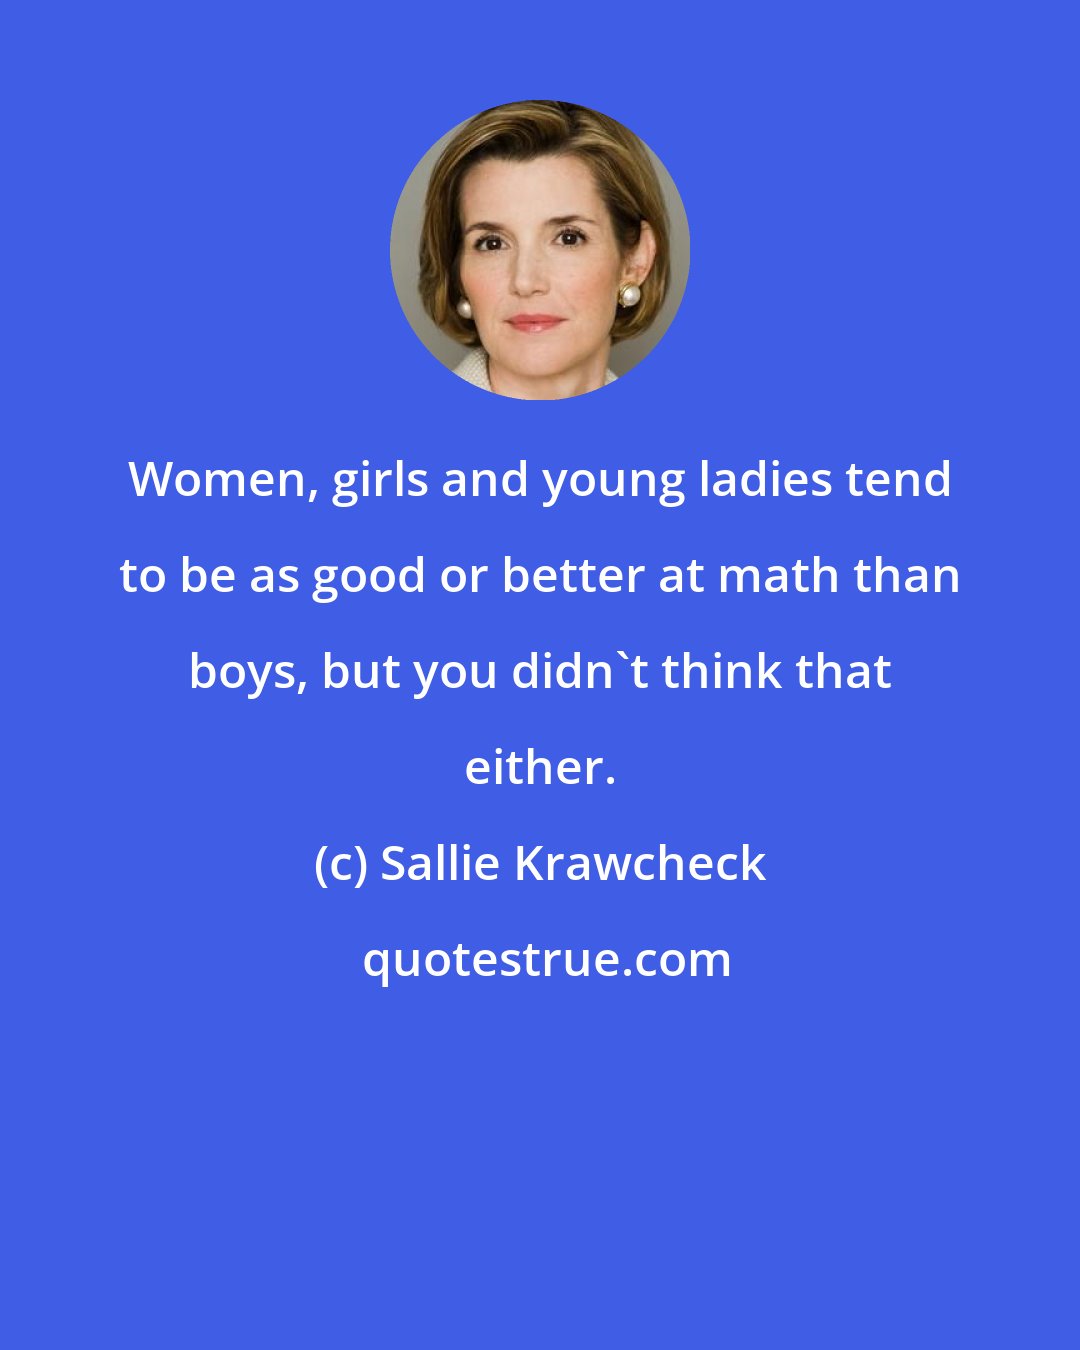 Sallie Krawcheck: Women, girls and young ladies tend to be as good or better at math than boys, but you didn't think that either.